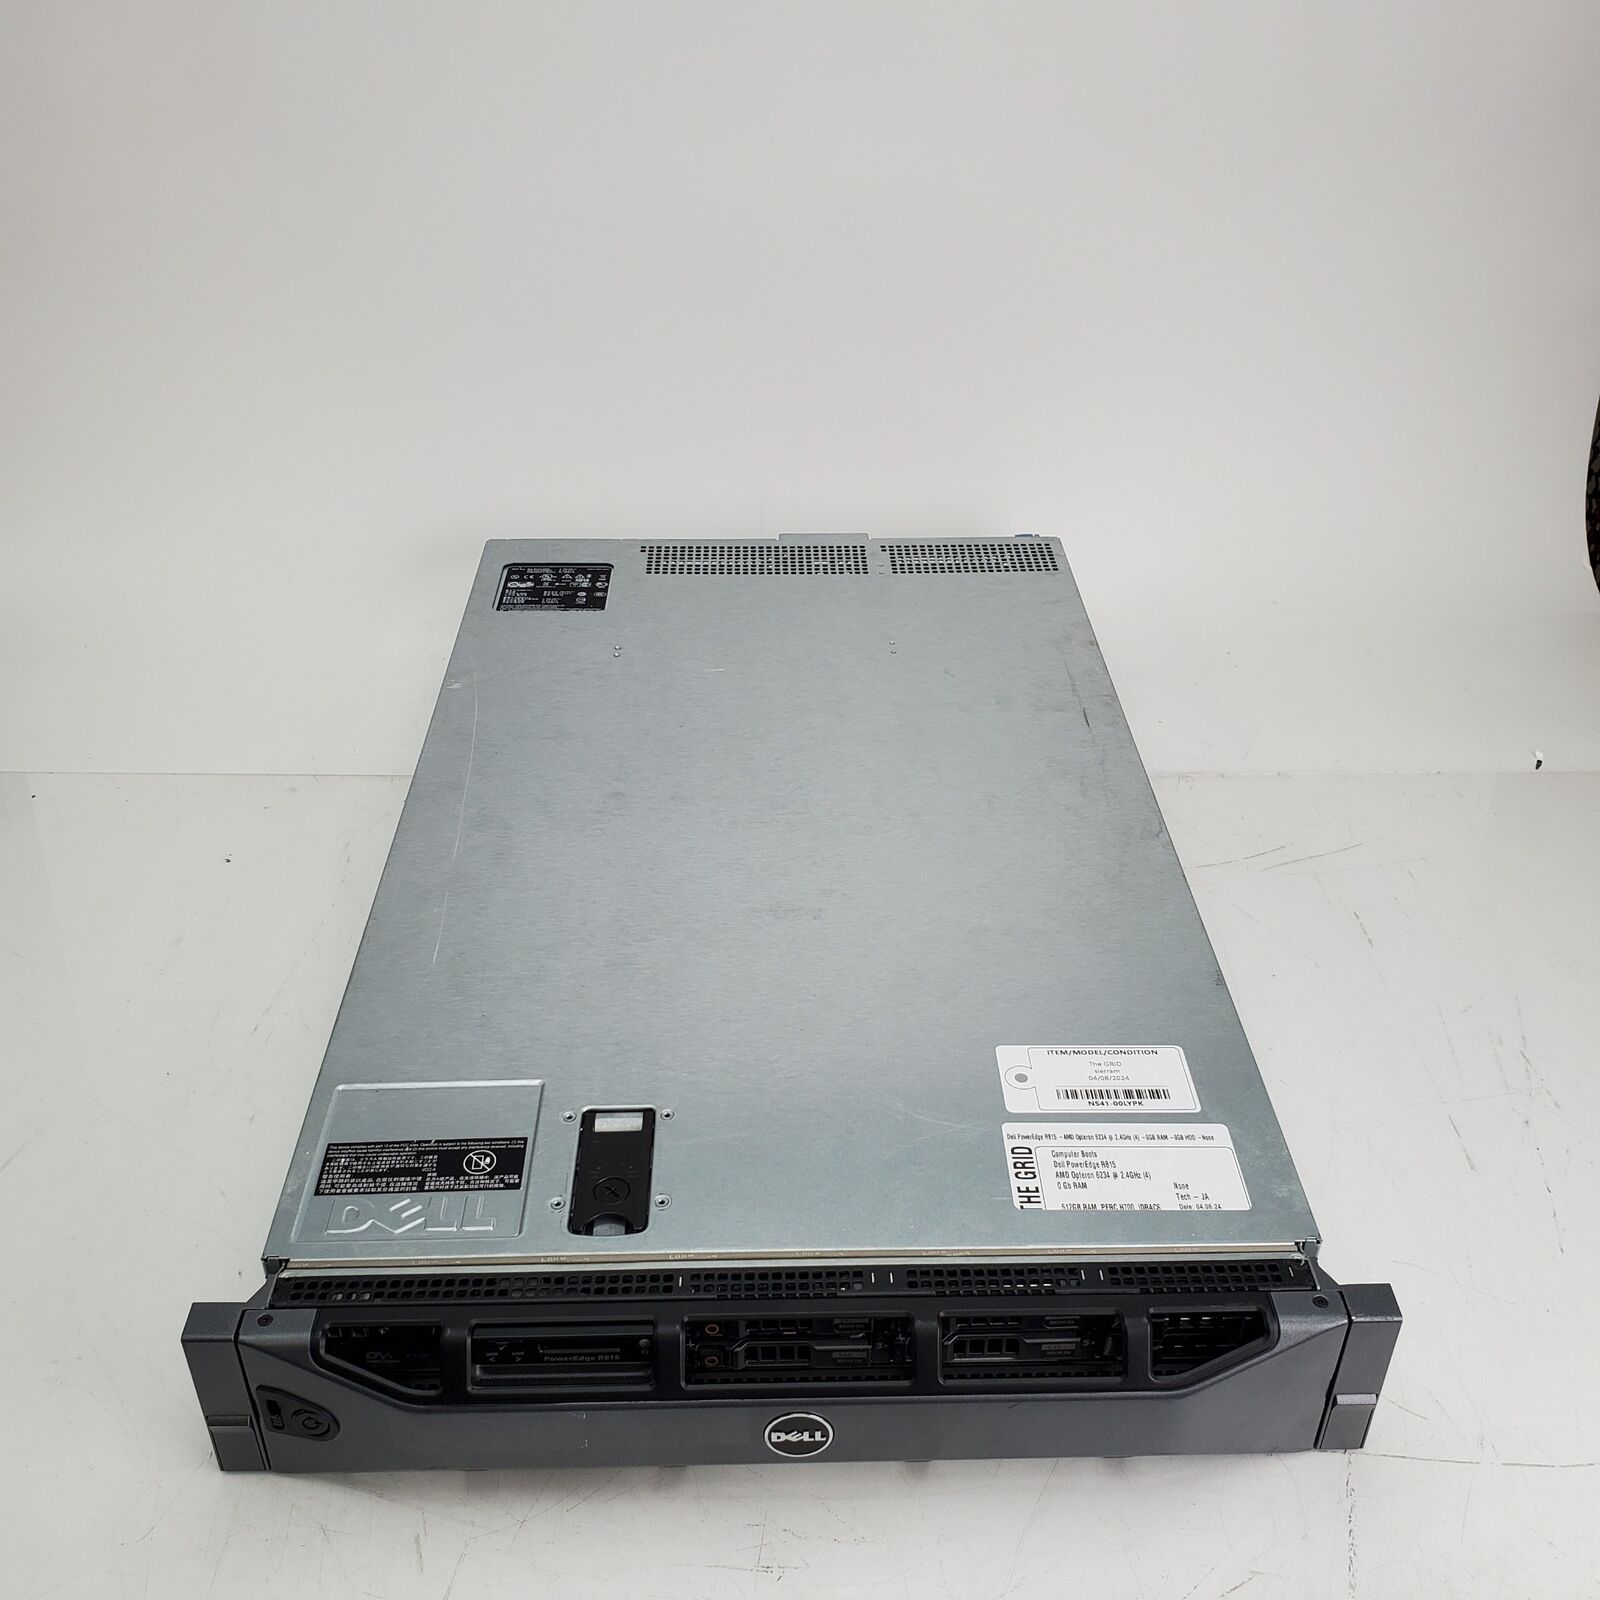 Dell PowerEdge R815 Server 4 x AMD Opteron 6234 2.40GHz 512GB RAM No HDDs